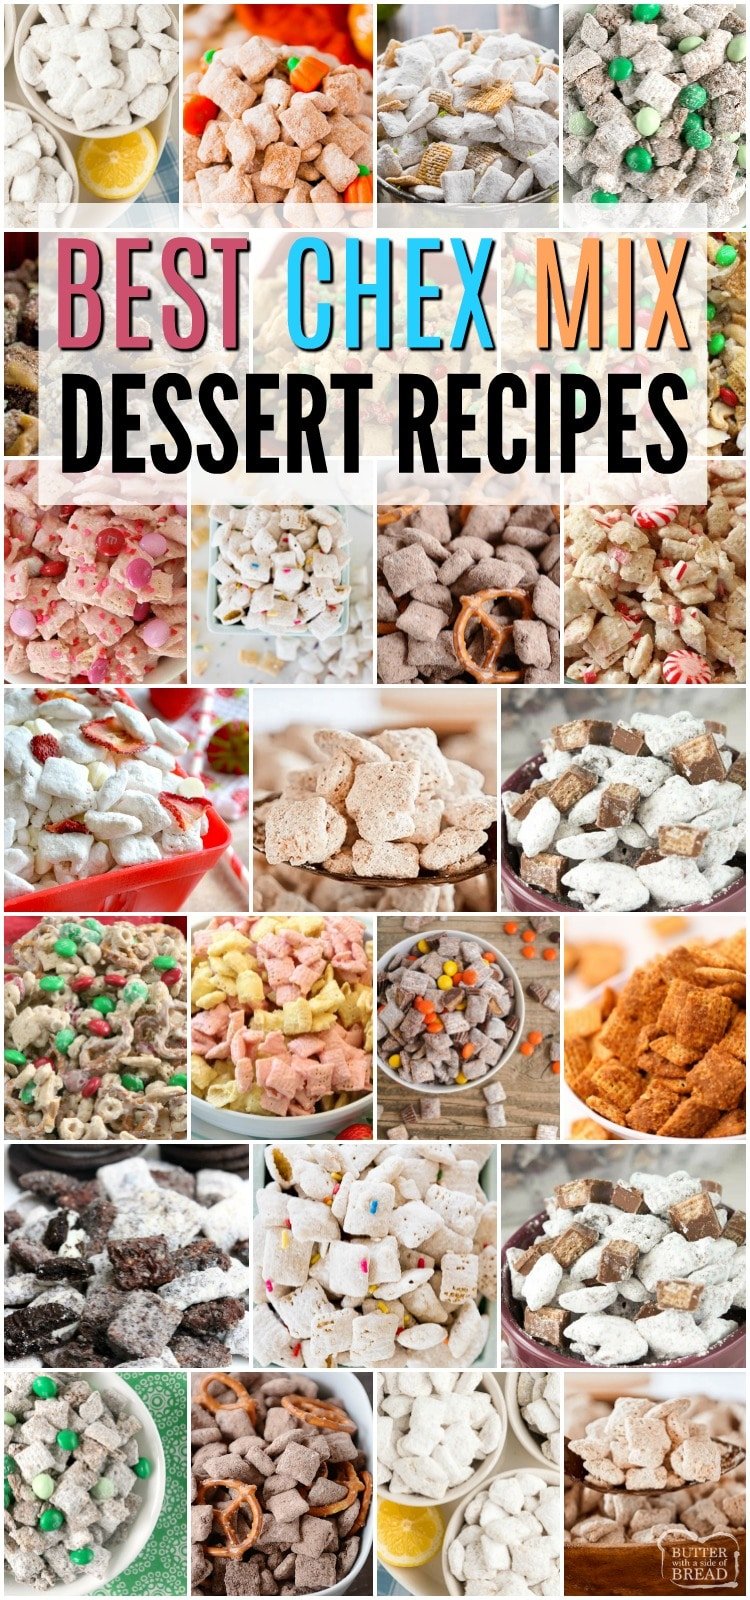 Chex Mix Dessert Recipes for everyone to enjoy! This compilation of our favorite Chex Mix Dessert Recipes from Lemon Muddy Buddies to Easy Peppermint Chex Mix is sure to be just what you're wanting for summer fun or holiday parties! #chexmix #dessertrecipes #yummysnacks #recipe from BUTTER WITH A SIDE OF BREAD